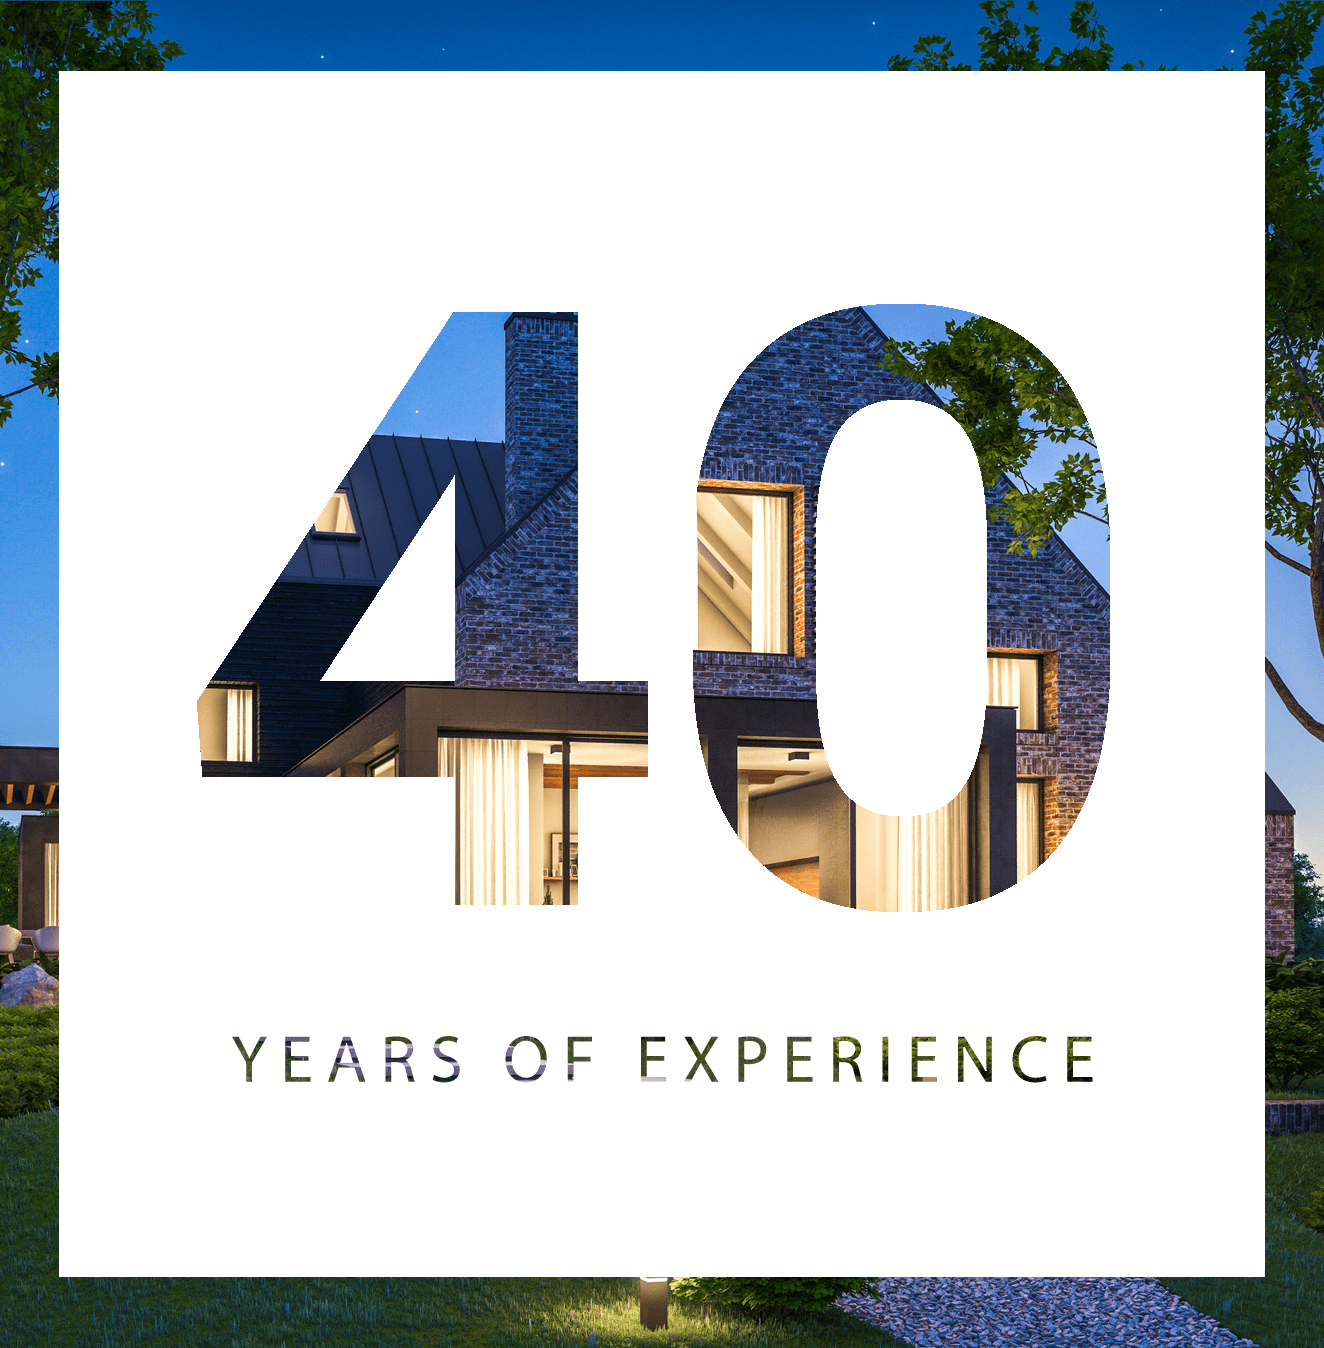 40 years of experience in the business with a beautifully shot house exterior at the back.